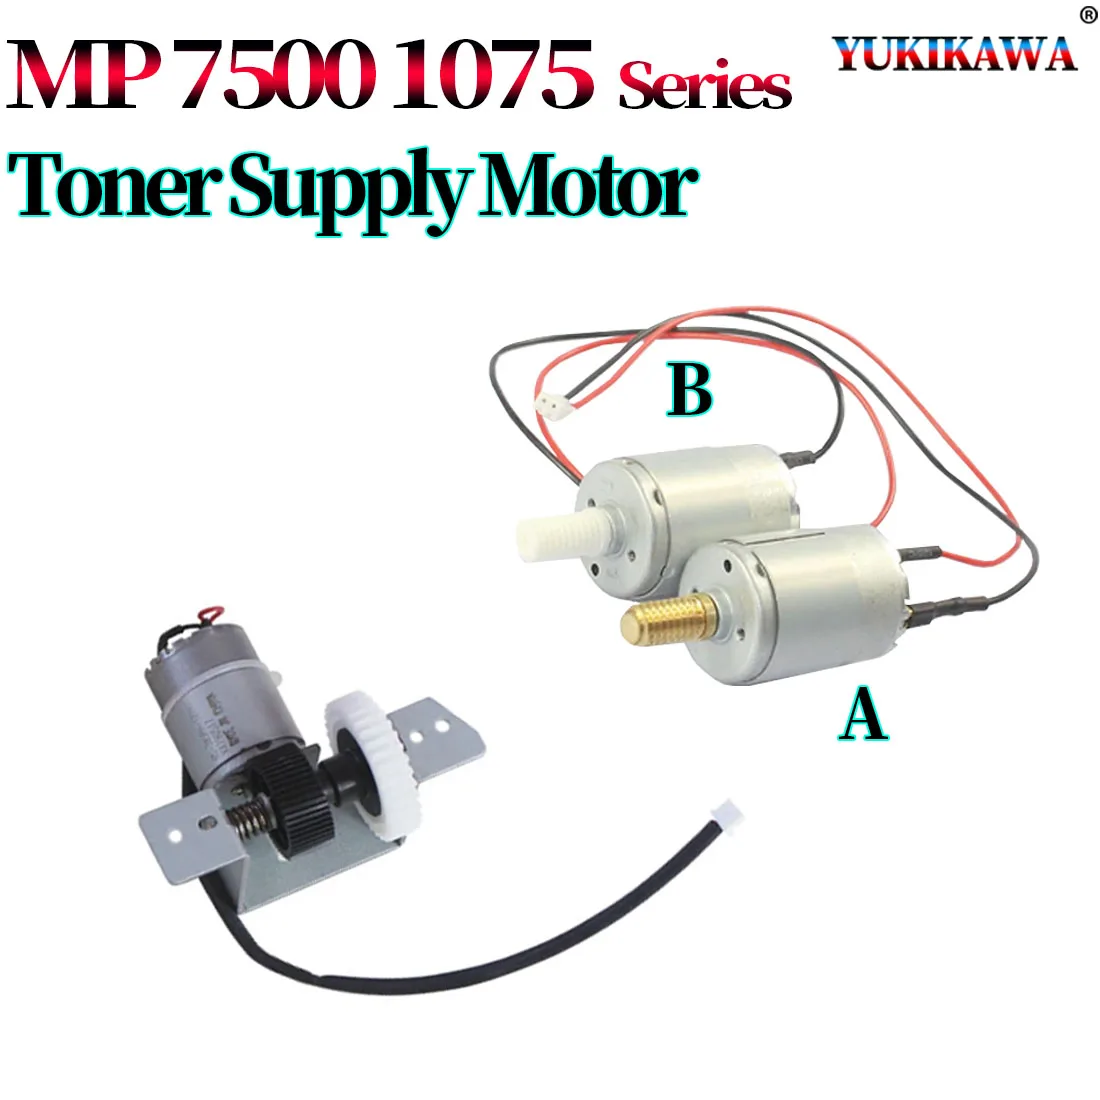 

Toner Supply Motor Unit For Use in Ricoh MP 2075 1075 2060 6001 8000 8001 9001 7001 6002 7002 6500 7000 7500 7502 B247-5312